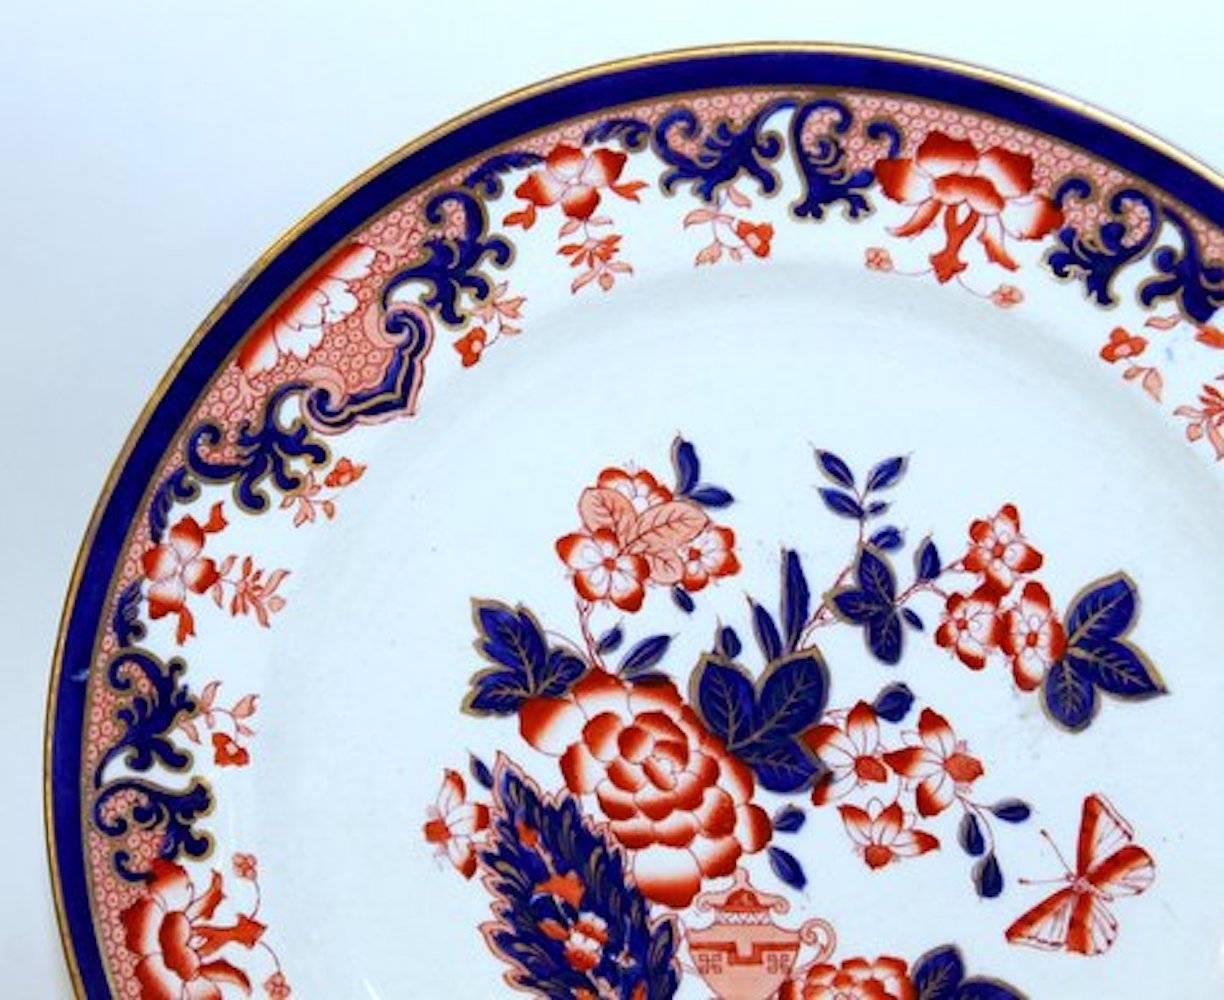 Set of 10 antique English hand-painted Imari decor ironstone dinner plates

Impressed Cadeuceus mark for well-known maker, Bishop &
Stonier of Hanley (Staffordshire). Some wear, slight marks from use
but no chips, cracks or restoration.
 